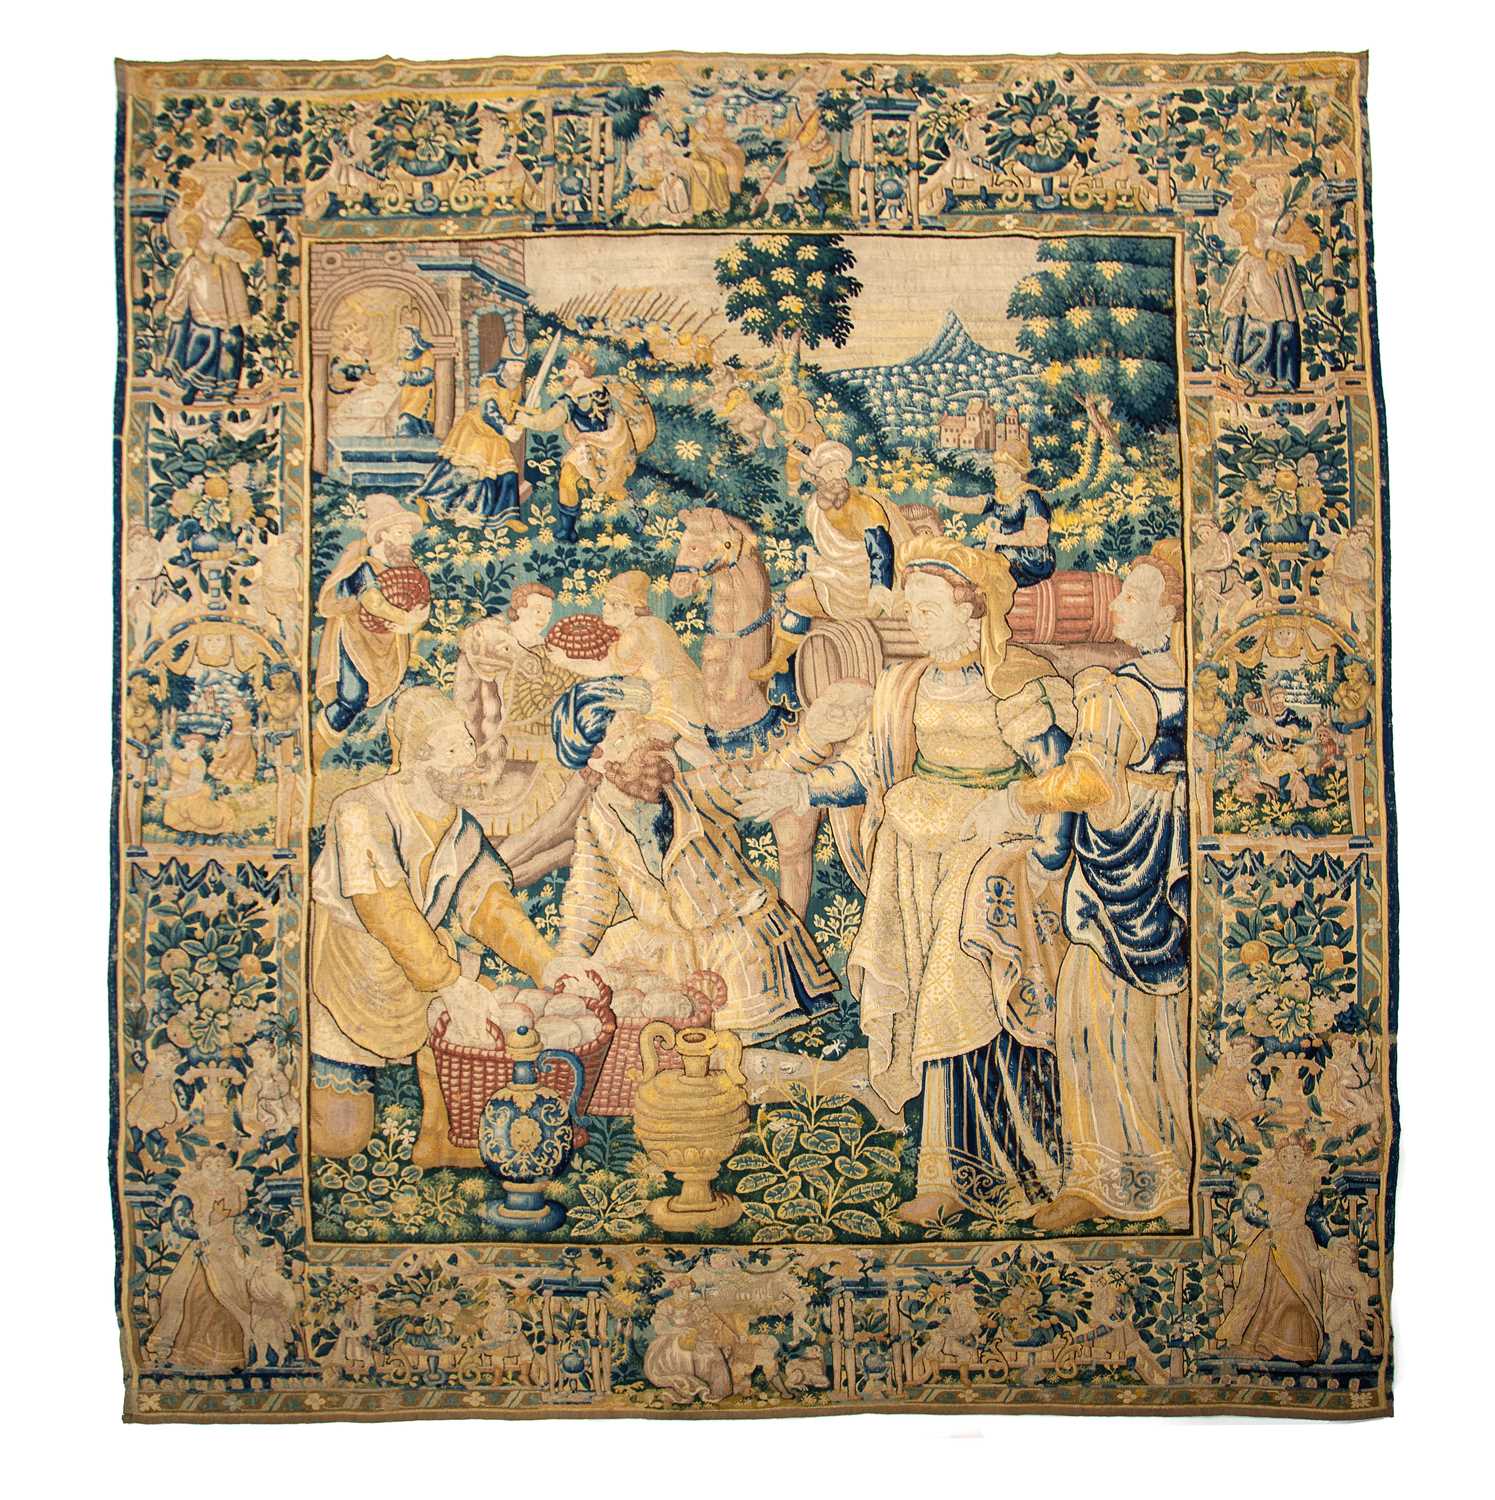 A FINE FLEMISH ALLEGORICAL TAPESTRY LATE 16TH / EARLY 17TH CENTURY woven in wool and silks, the